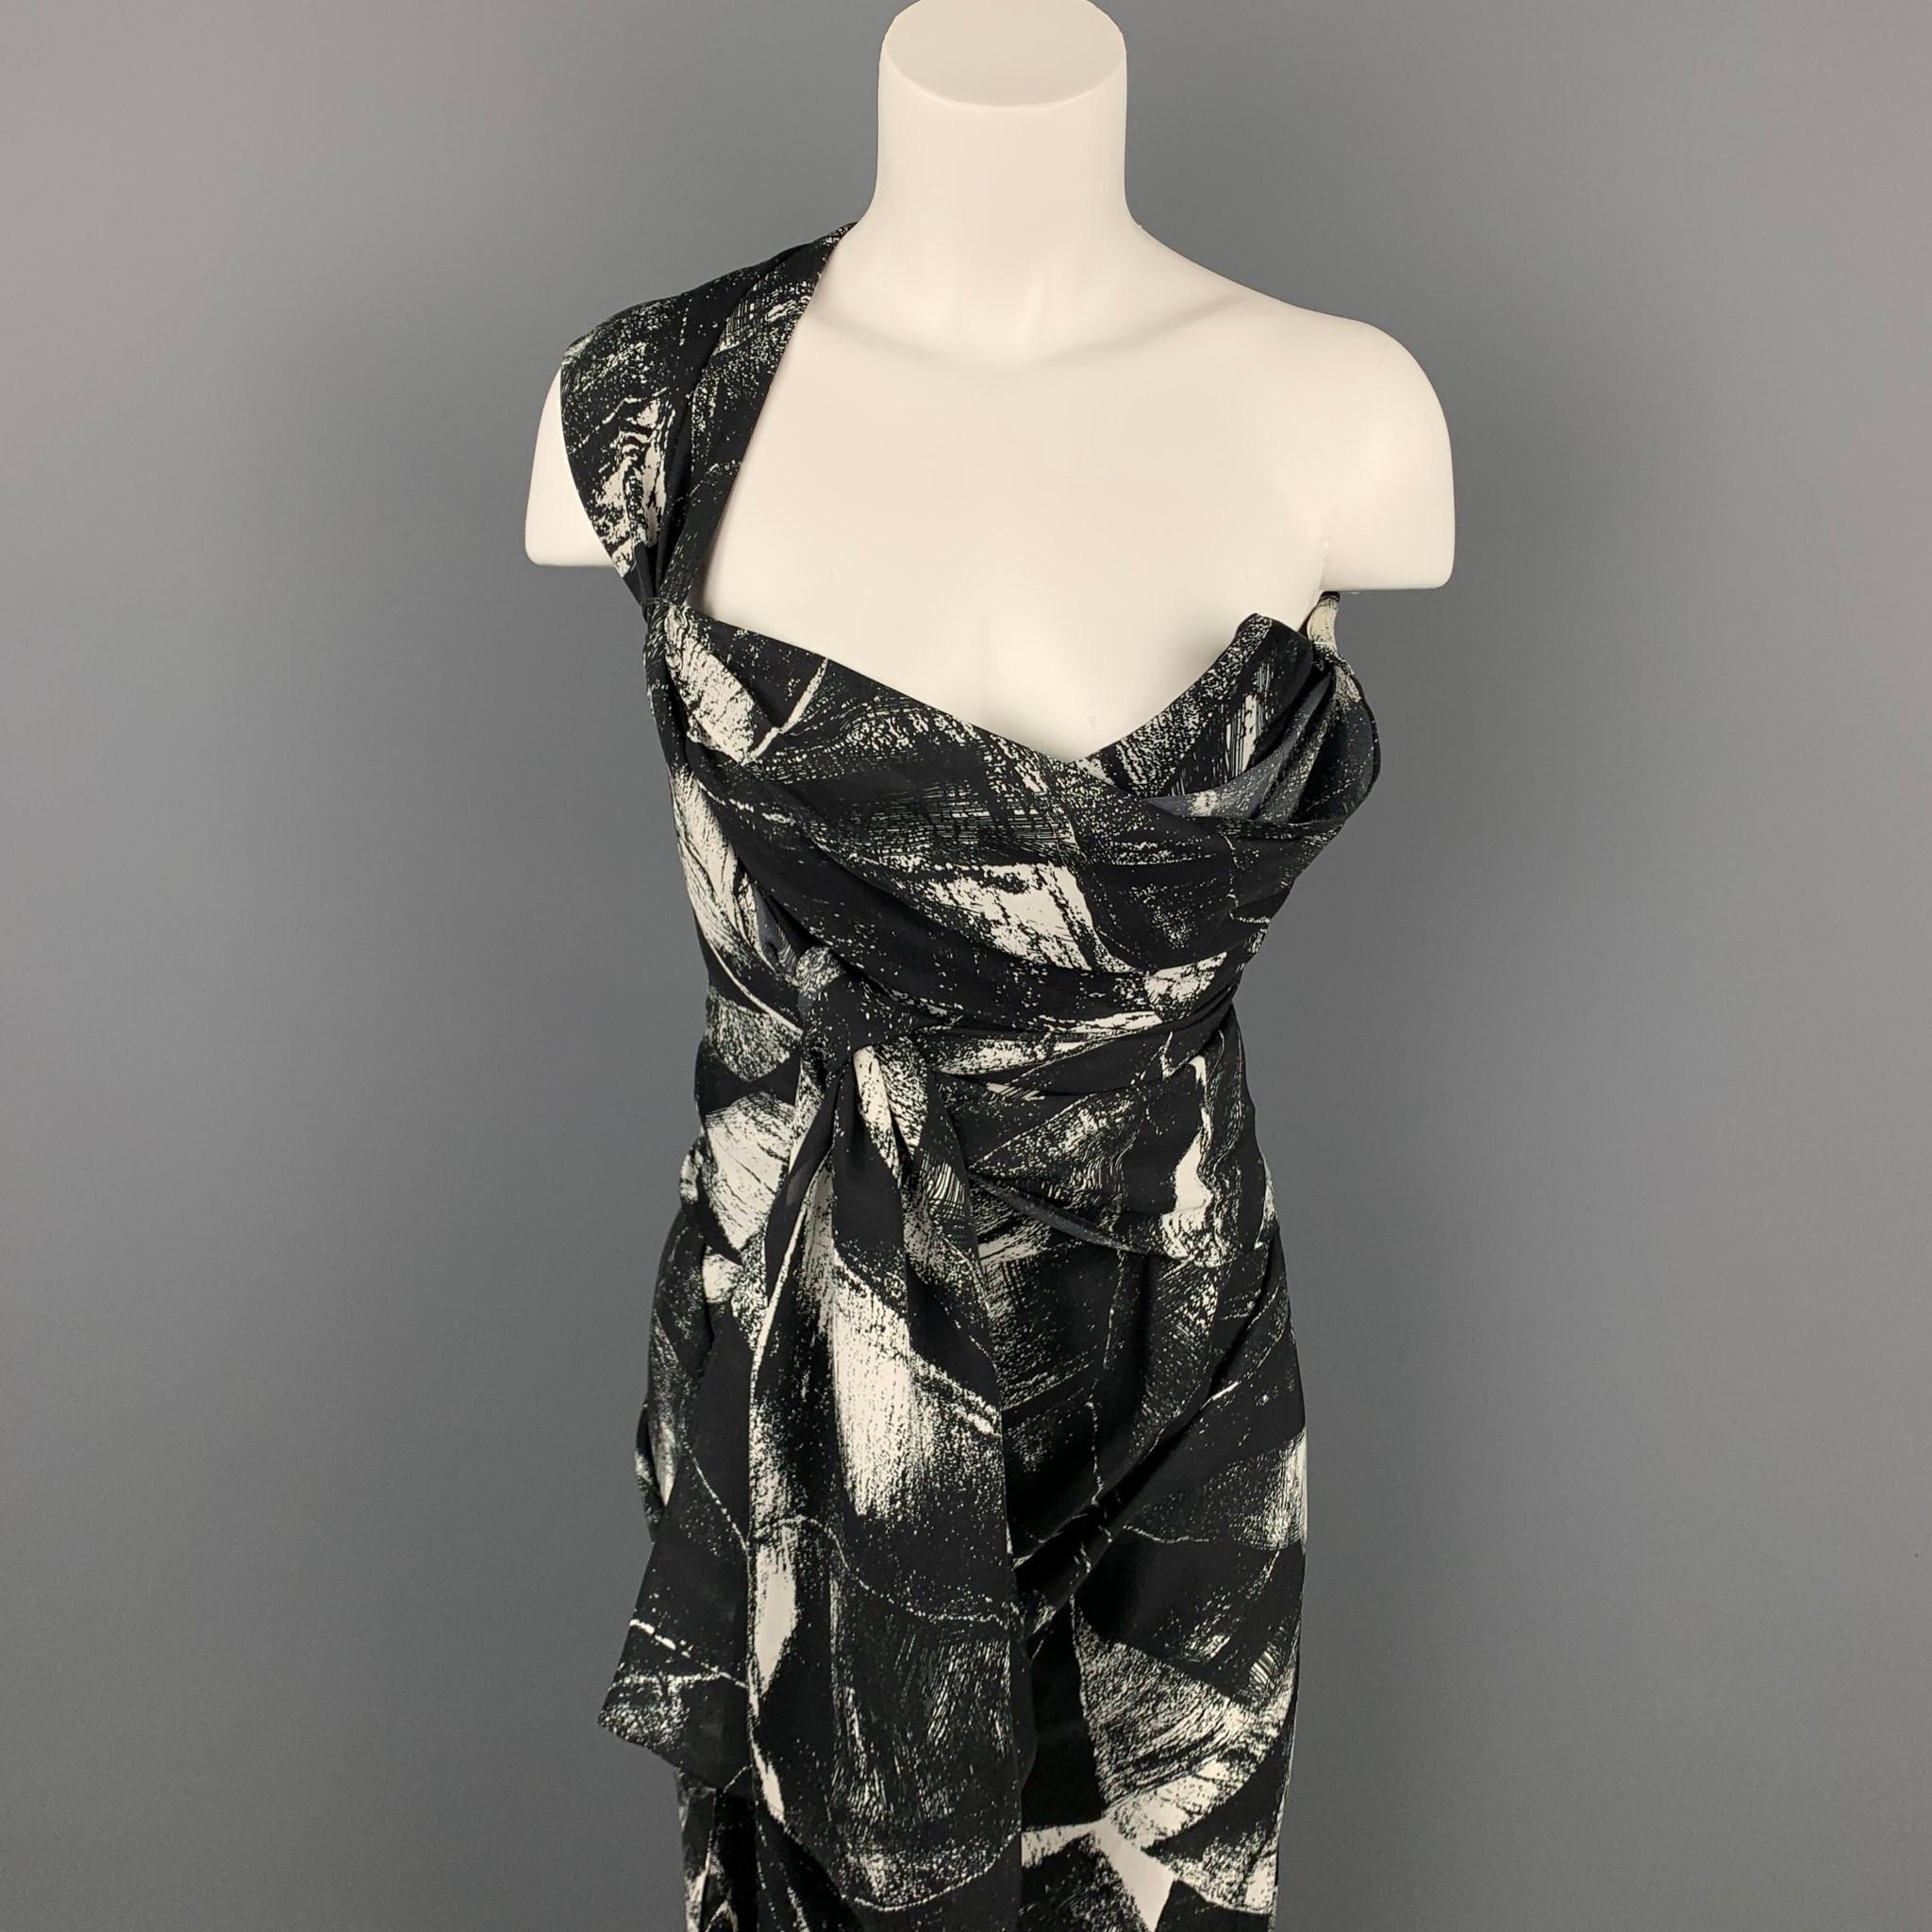 VIVIENNE WESTWOOD cocktail dress comes in a black & white marbled silk featuring a strapless corset design, wrap detail, and a back zip up closure. Made in Italy. 

Very Good Pre-Owned Condition.
Marked: UK 12 / US 8

Measurements:

Bust: 30